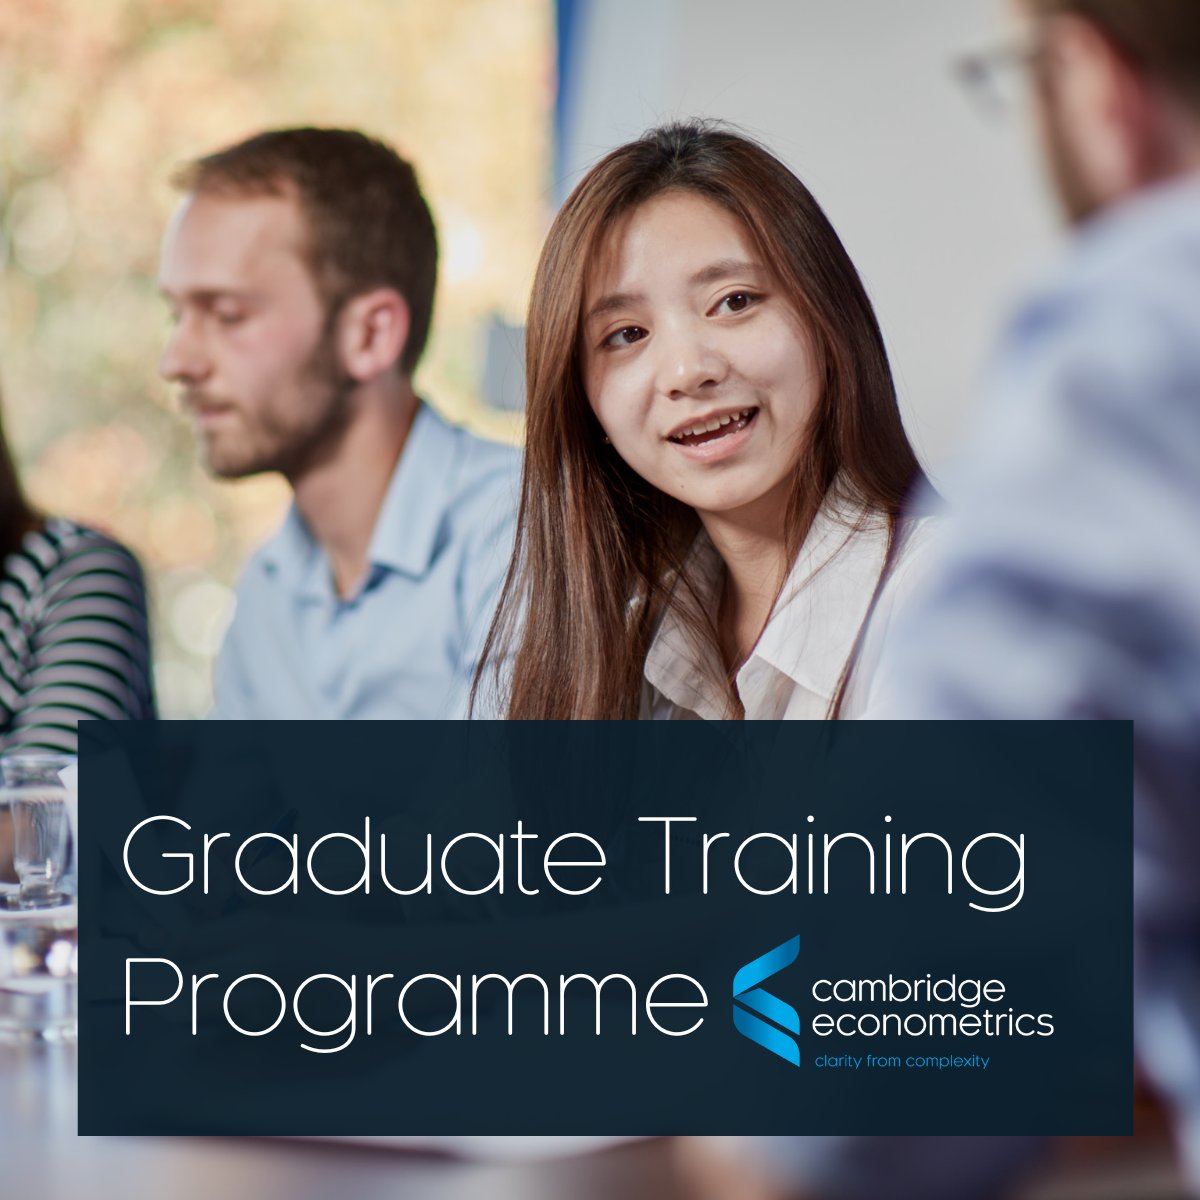 Cambridge Econometrics is pleased to announce that applications are now open for our new Graduate Training Programme, starting Autumn 2024! Find out more about these exciting new roles and how to apply here: camecon.com/who/careers/